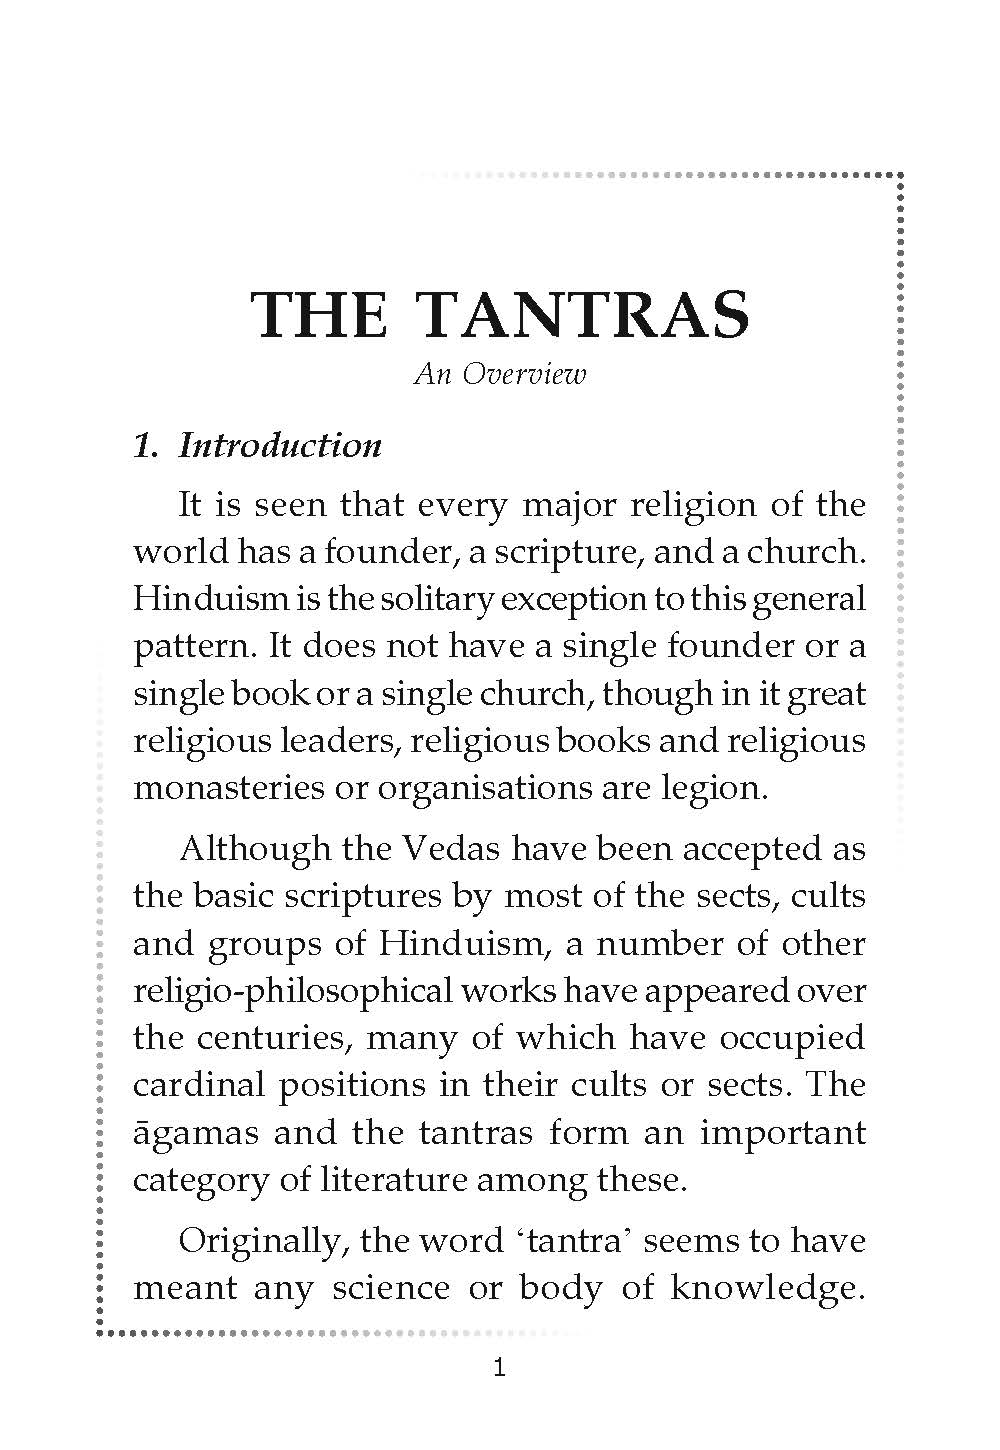 The Tantras - An Overview